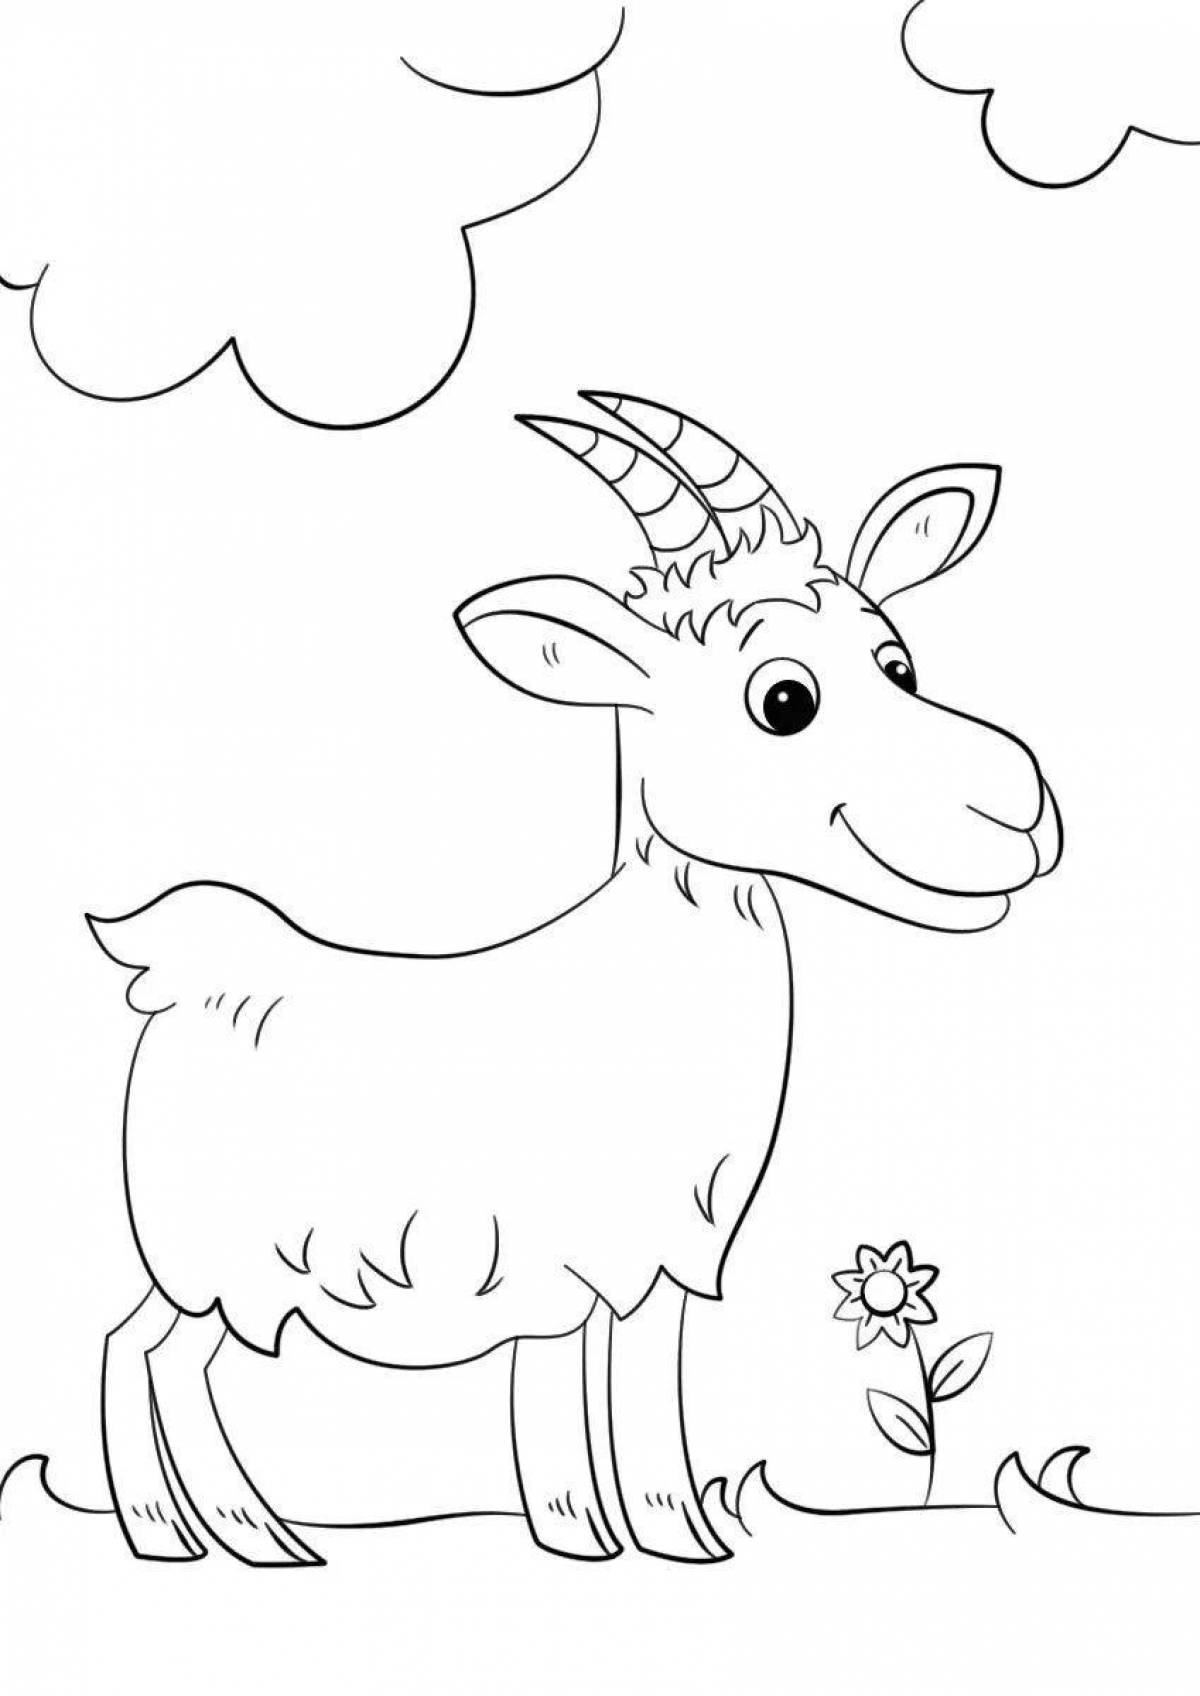 Fairytale coloring book with a goat for children 5-6 years old